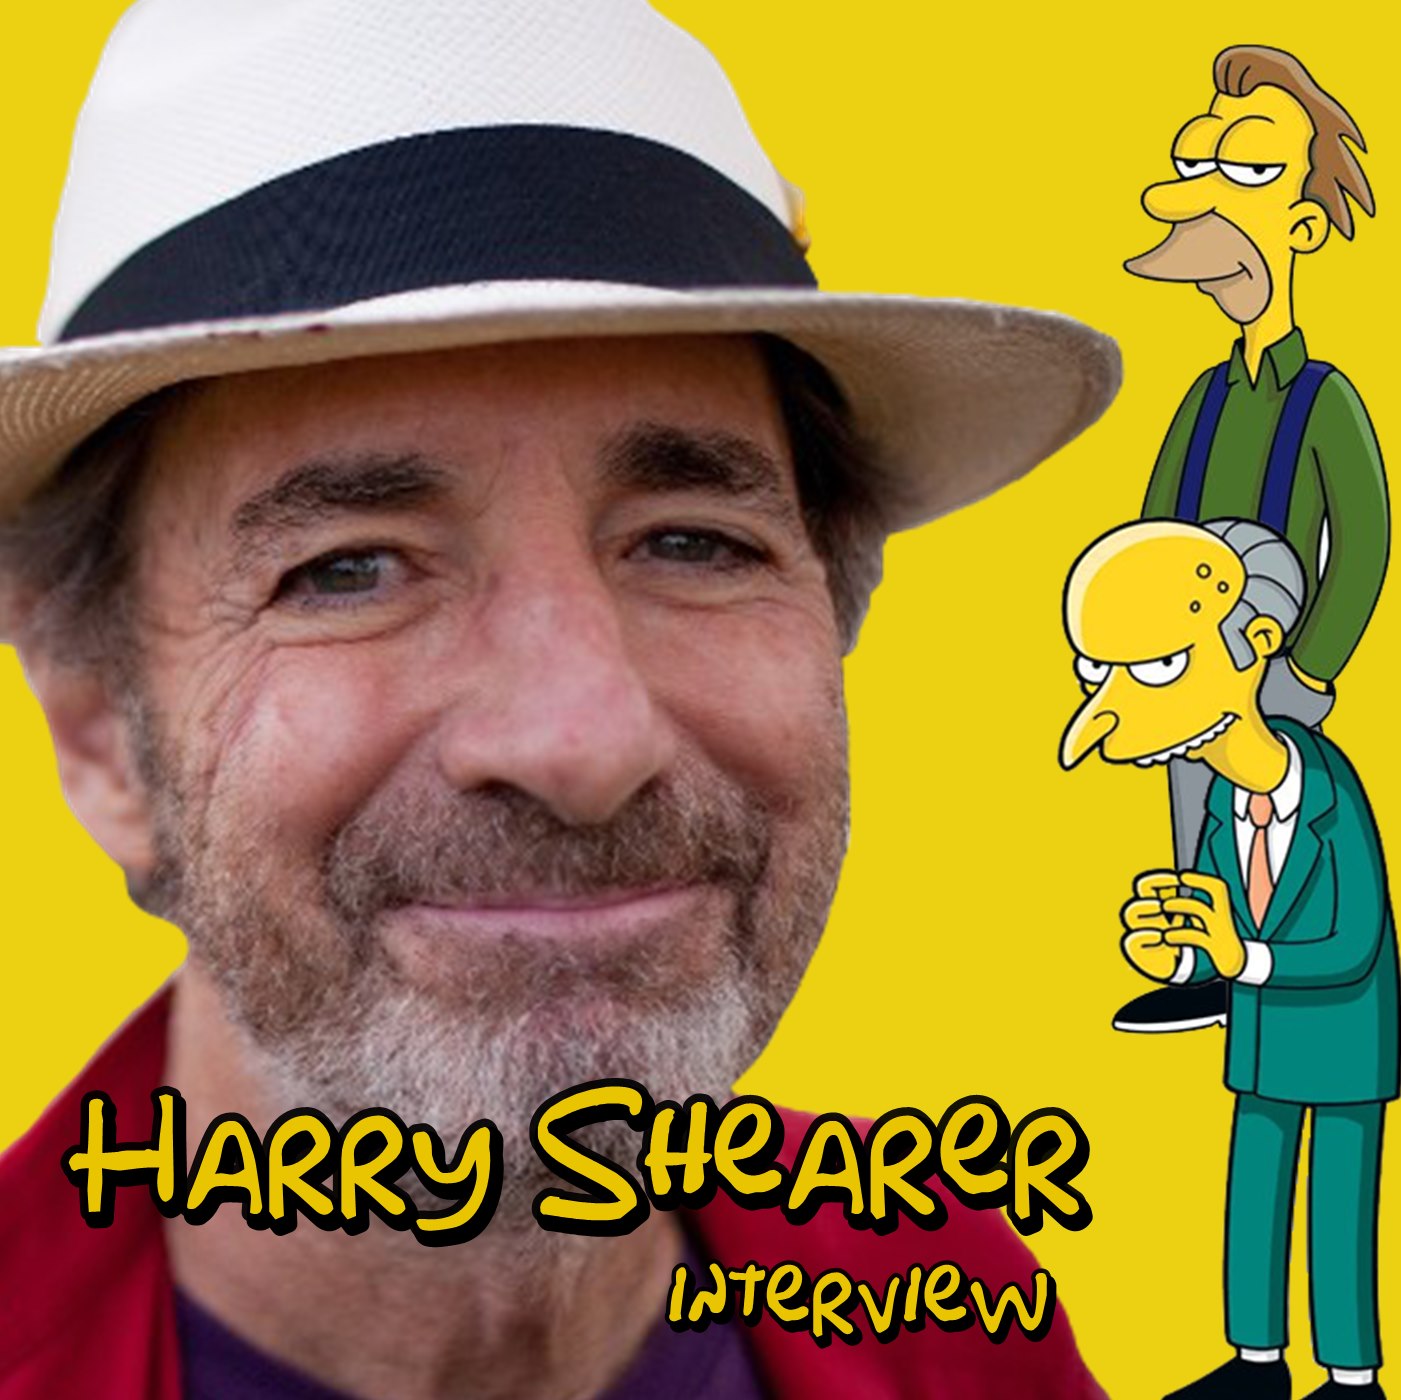 Interview with Harry Shearer